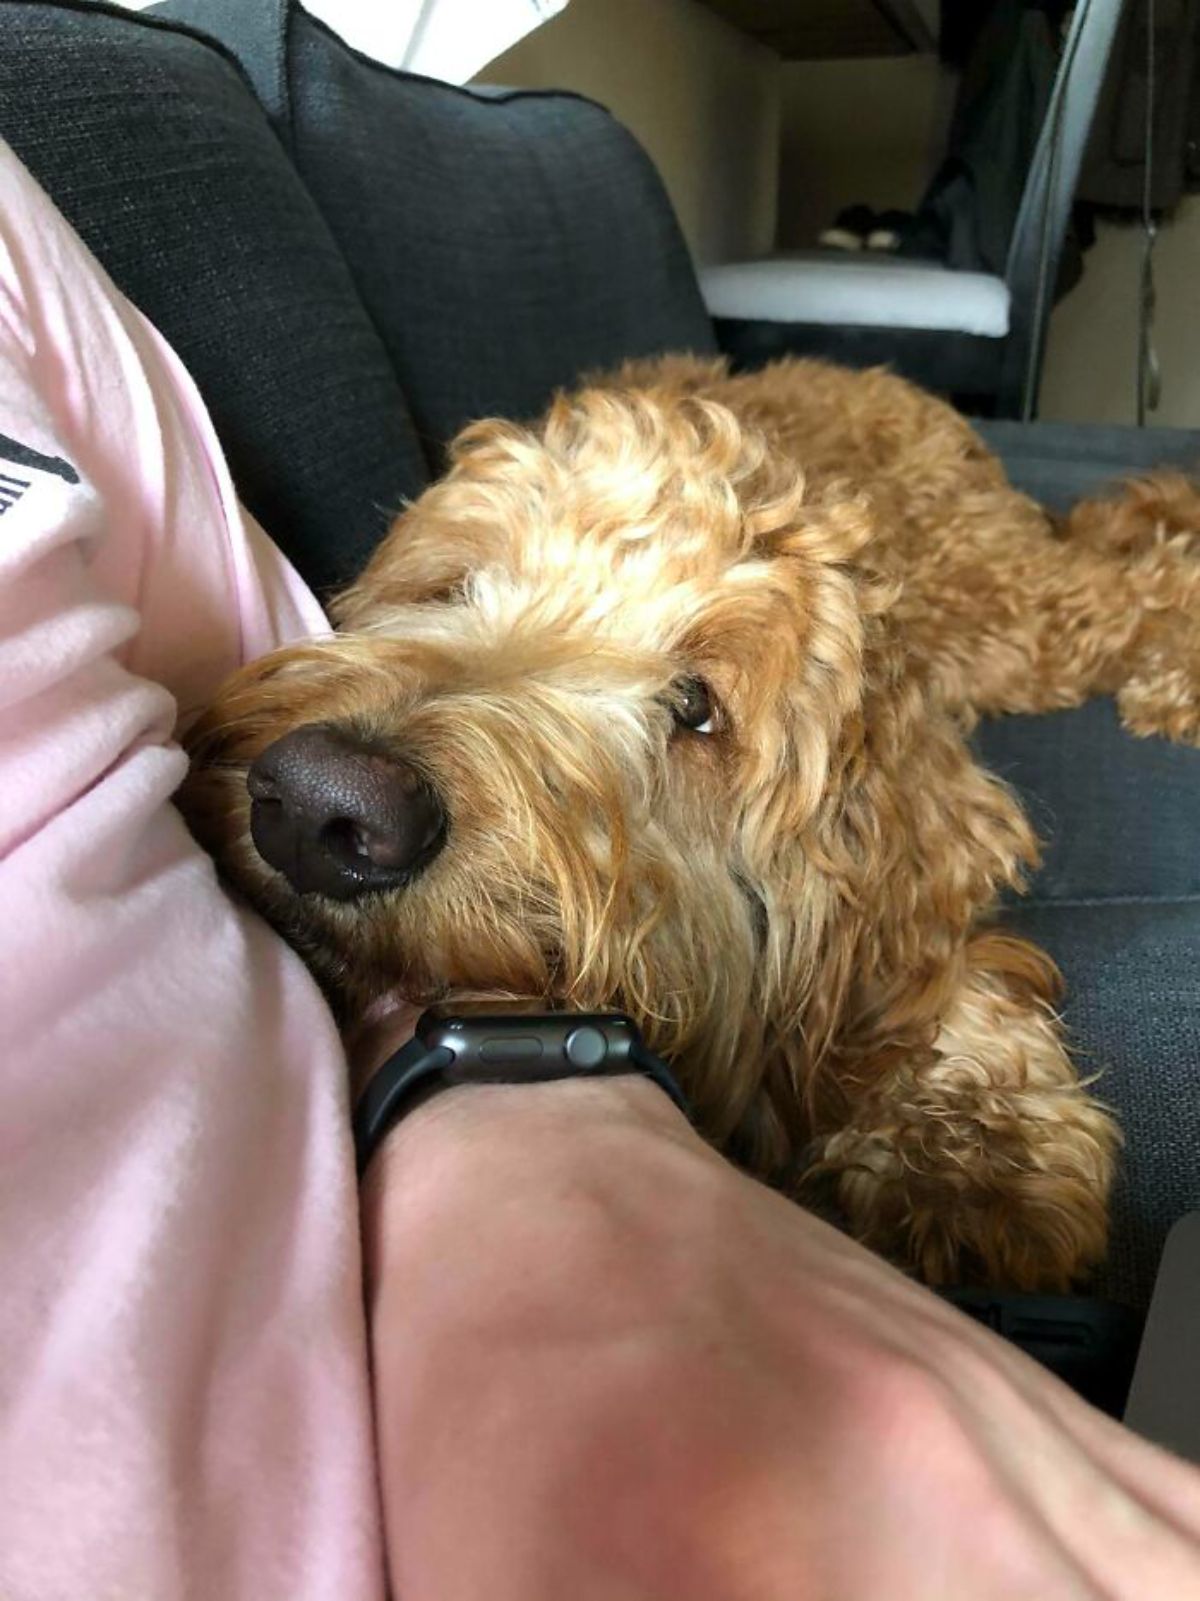 brown poodle laying its head on someone's arm and looking up lovingly